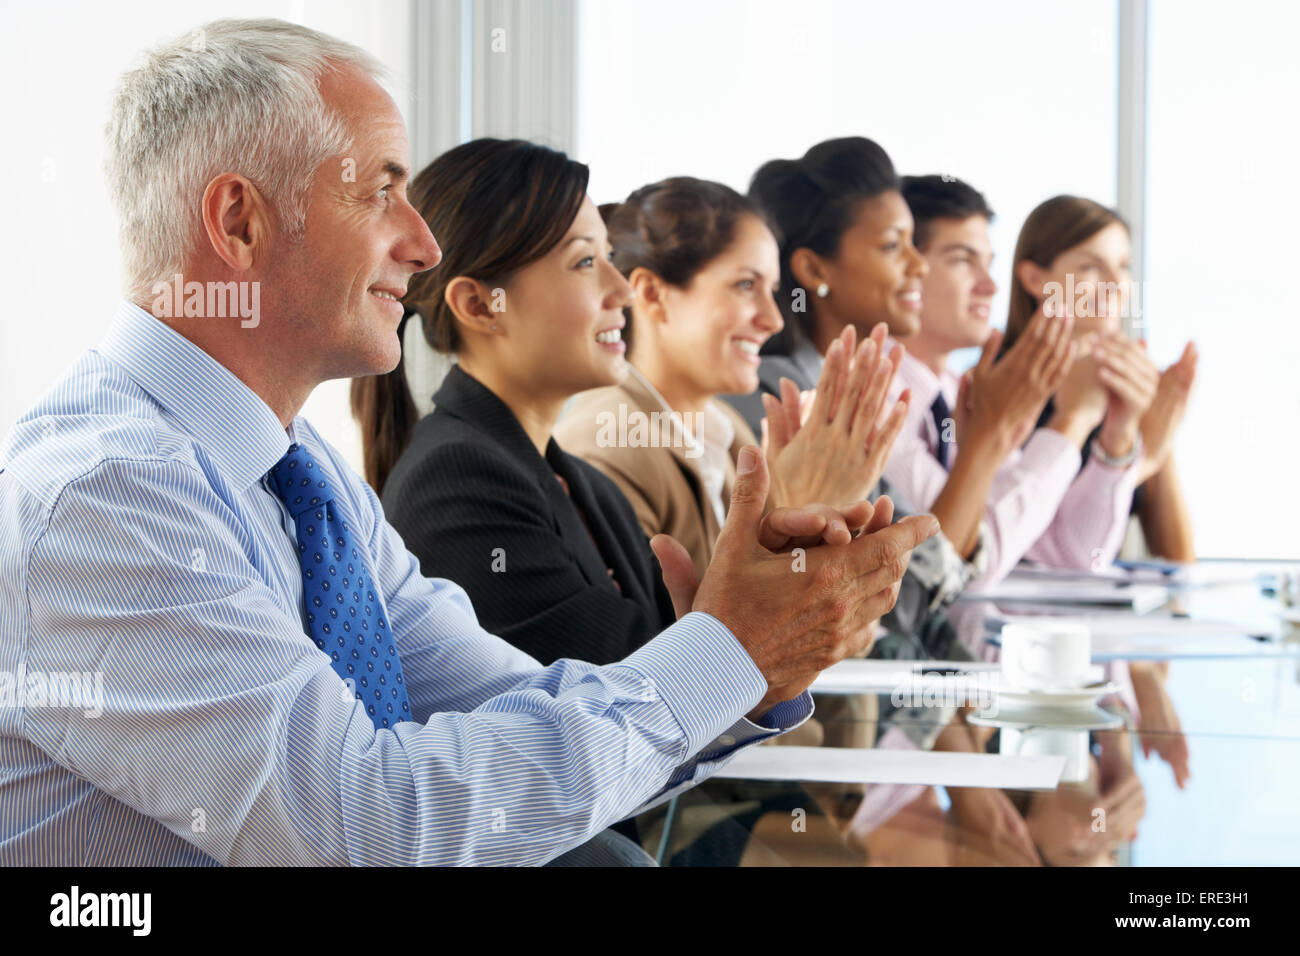 Line Of Business People Listening To Presentation Seated At Glass Boardroom Table Stock Photo